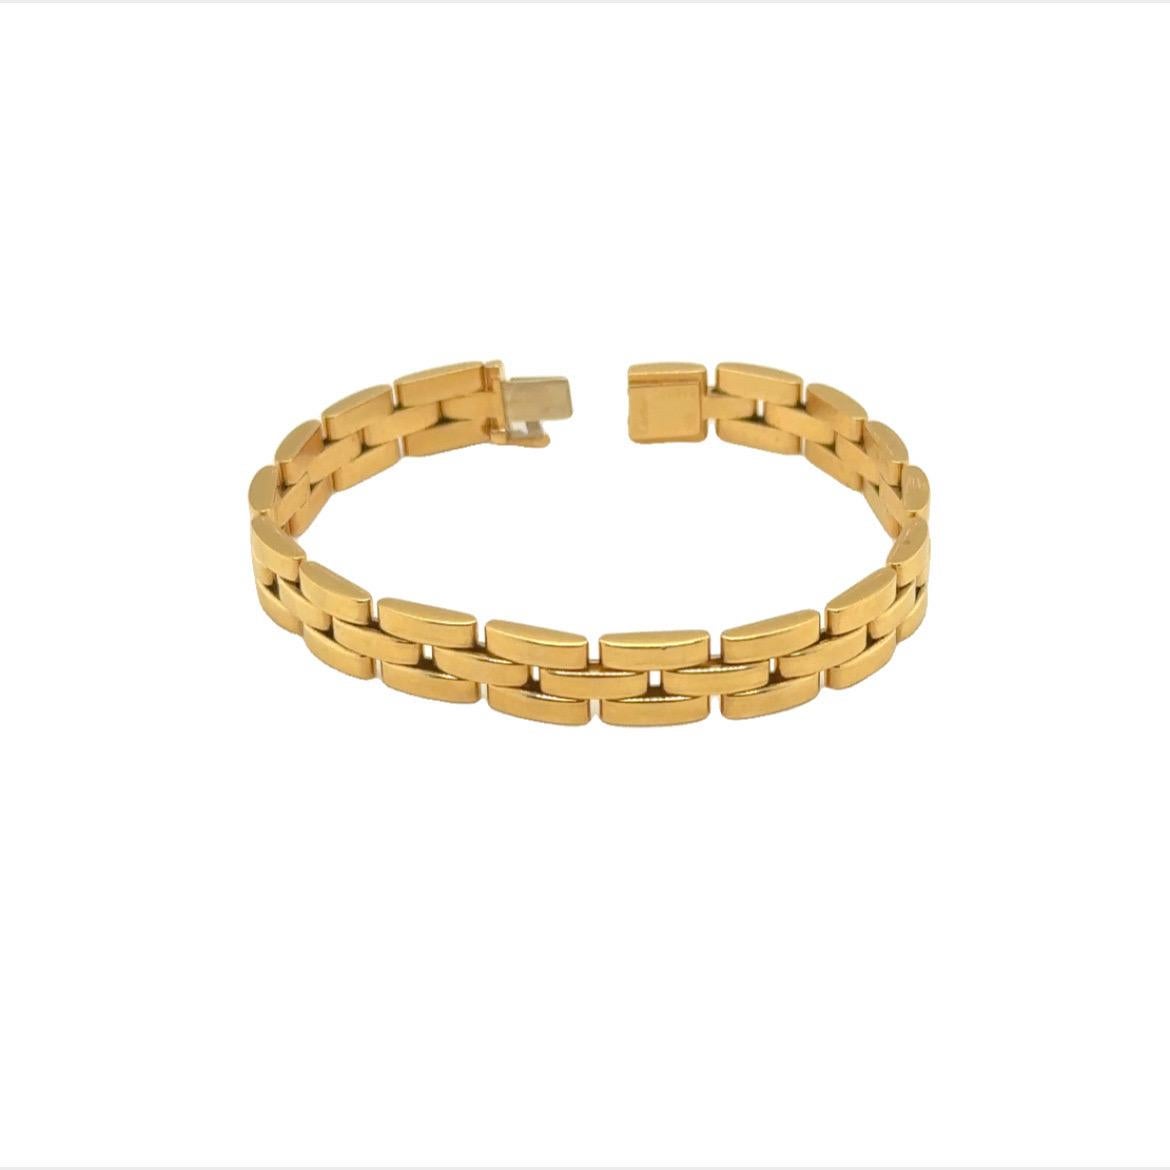 This Cartier 'MAILLON PANTHÈRE' bracelet features 18K yellow gold in a three row brick link design.7 1/4 inches long. Gross weight: 26.50  dwt. Stamp: 750 848545 Cartier (French hallmark)(maker's mark).
